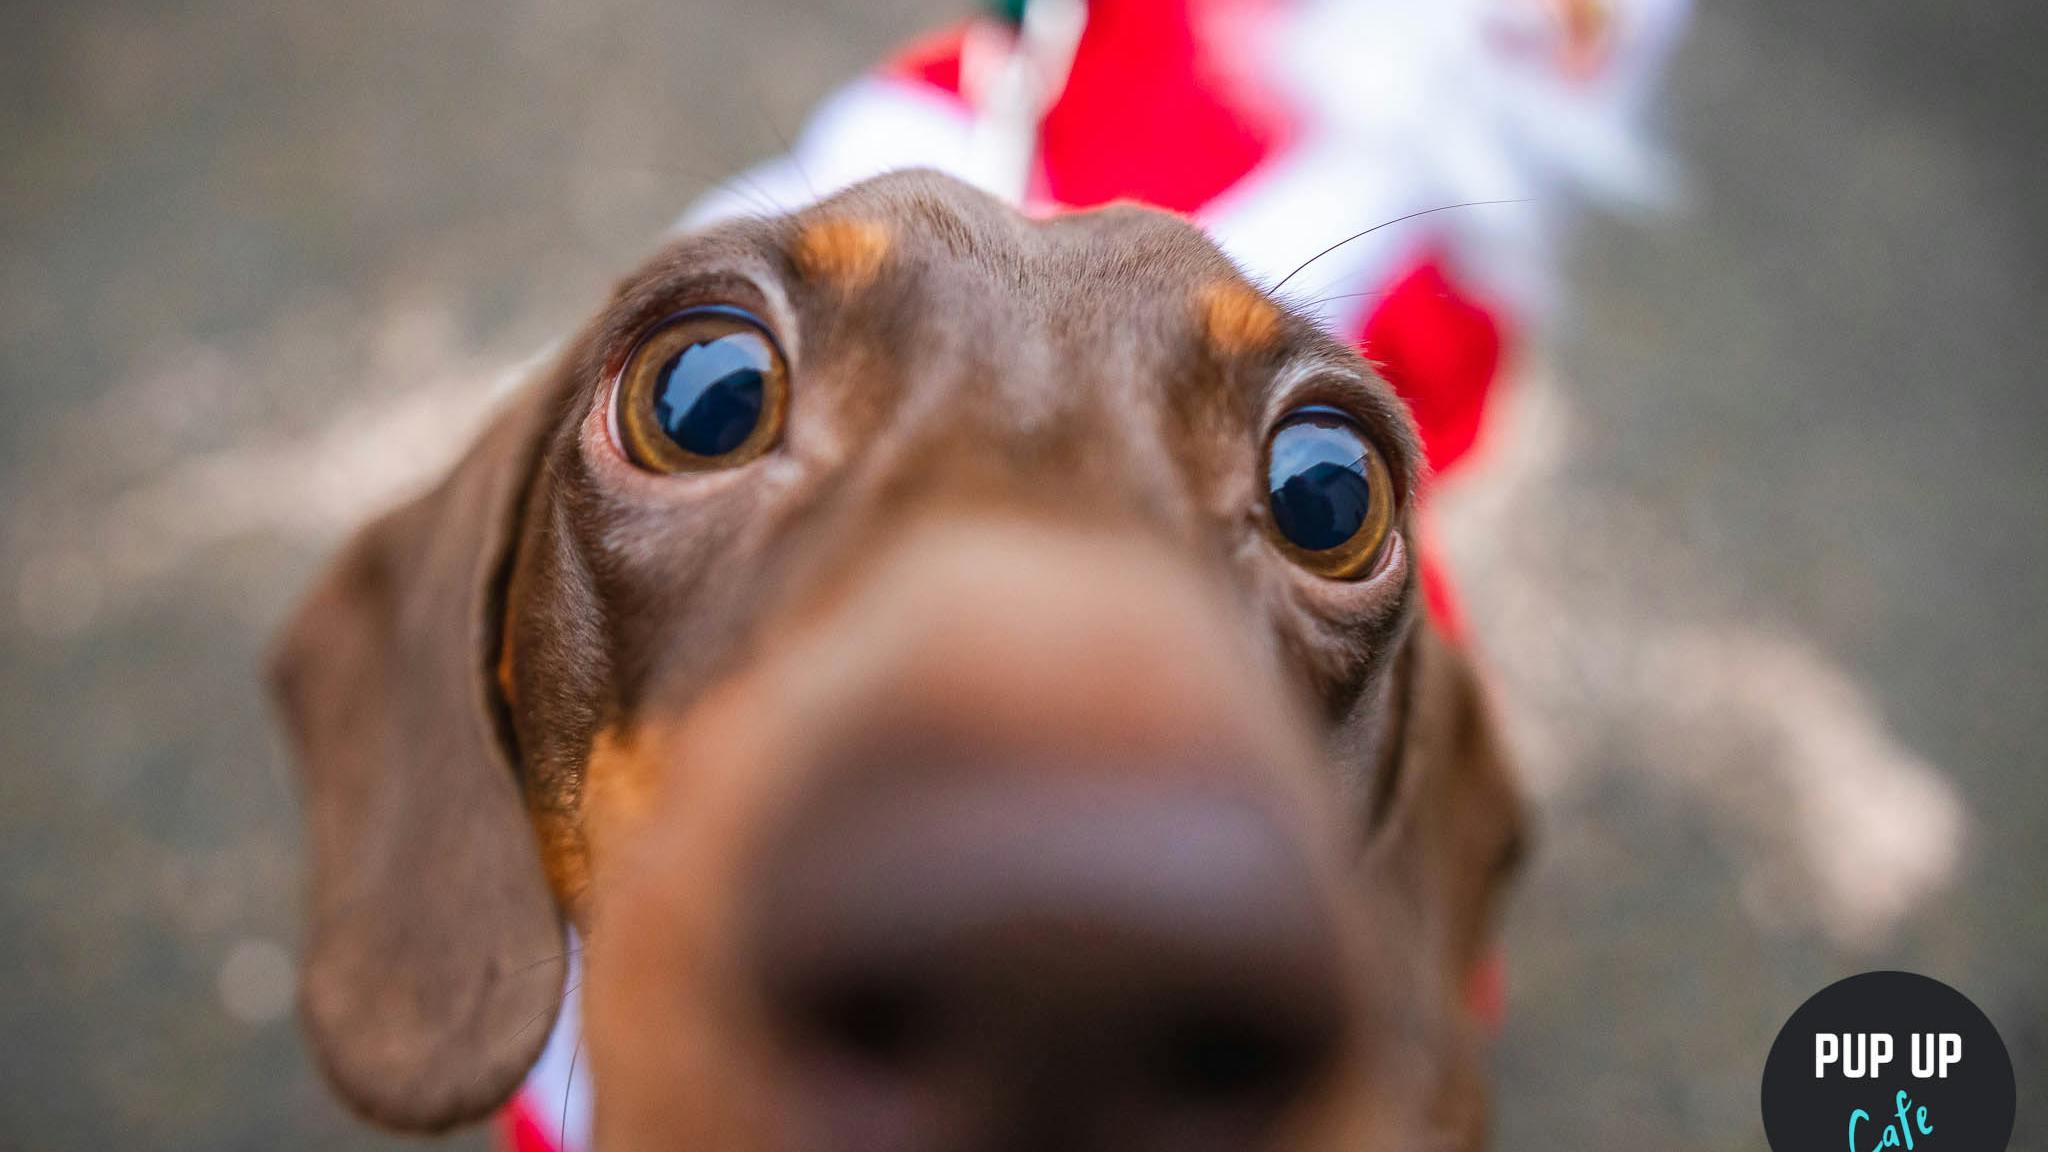 Pop-up cafe coming to Edinburgh this Christmas with hundreds of sausage dogs